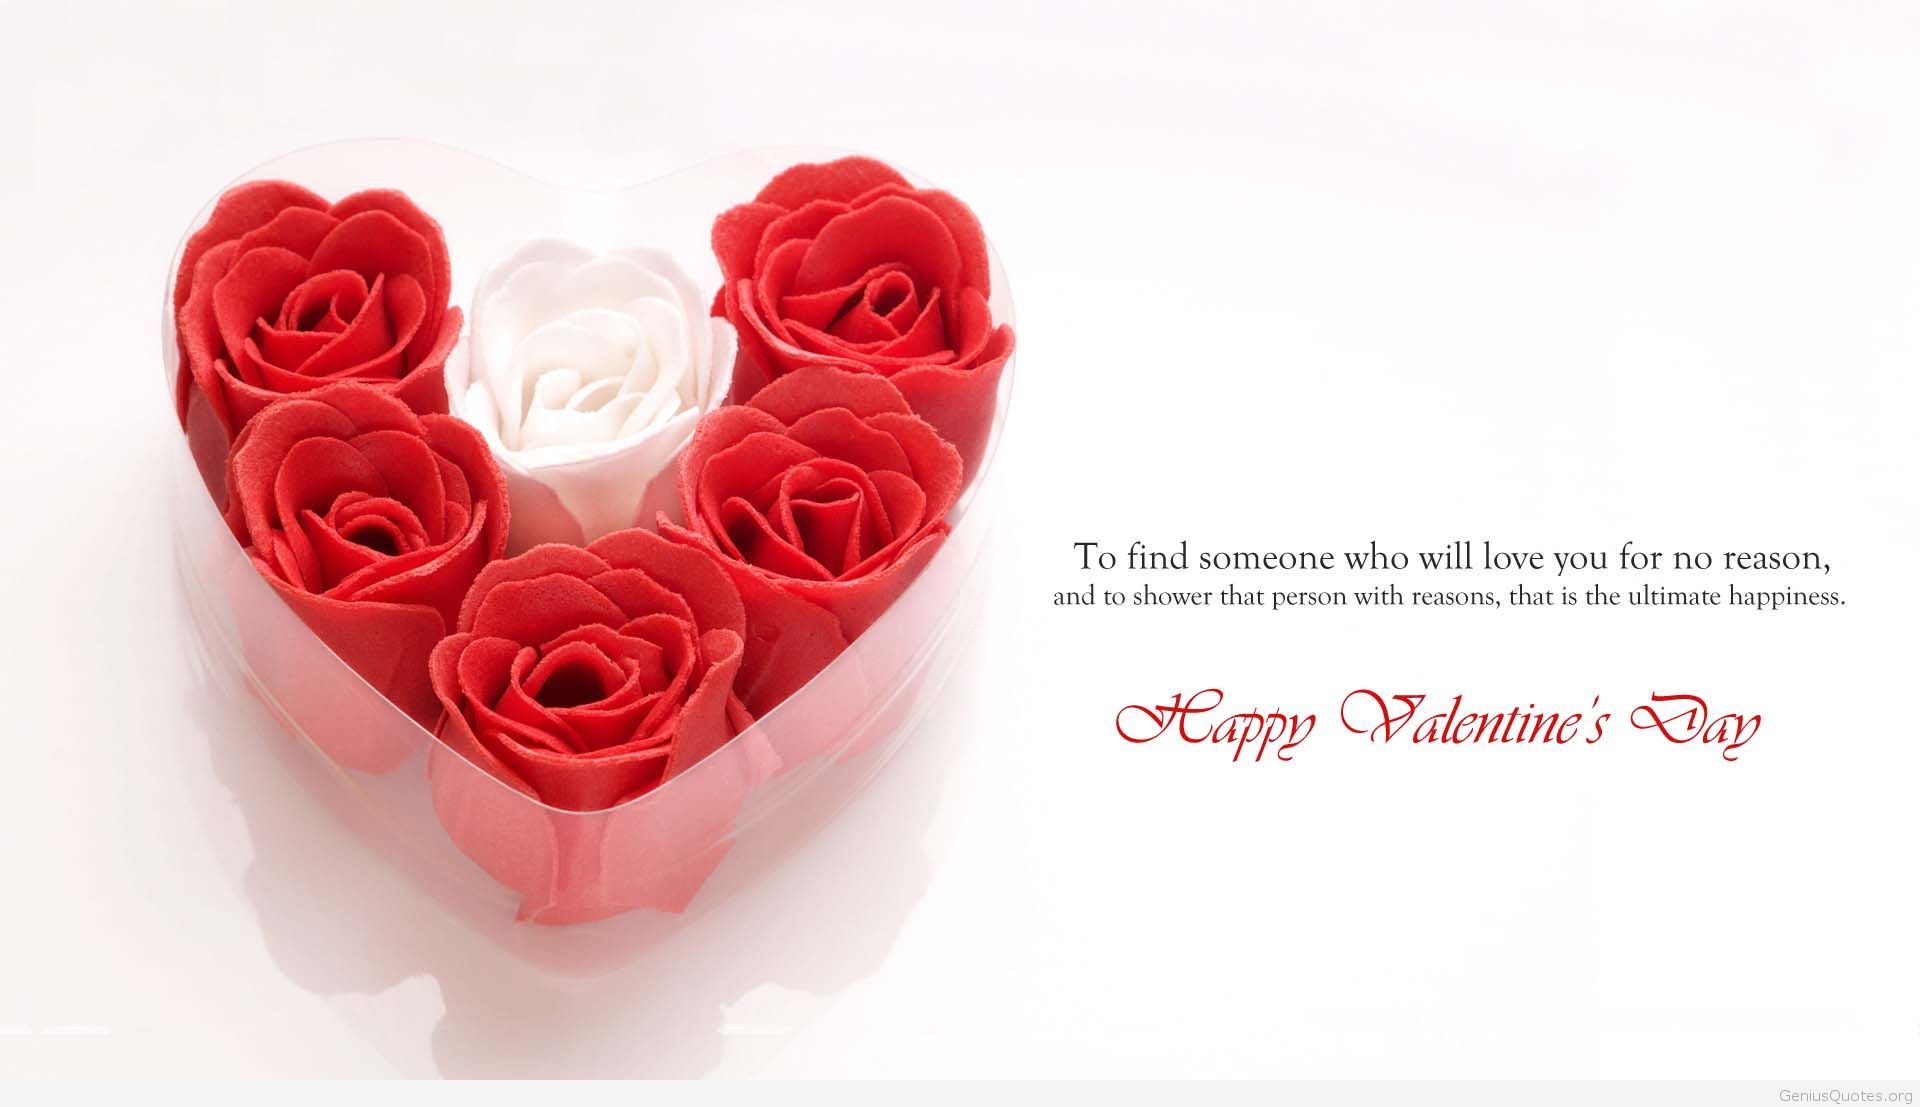 happy rose day images 